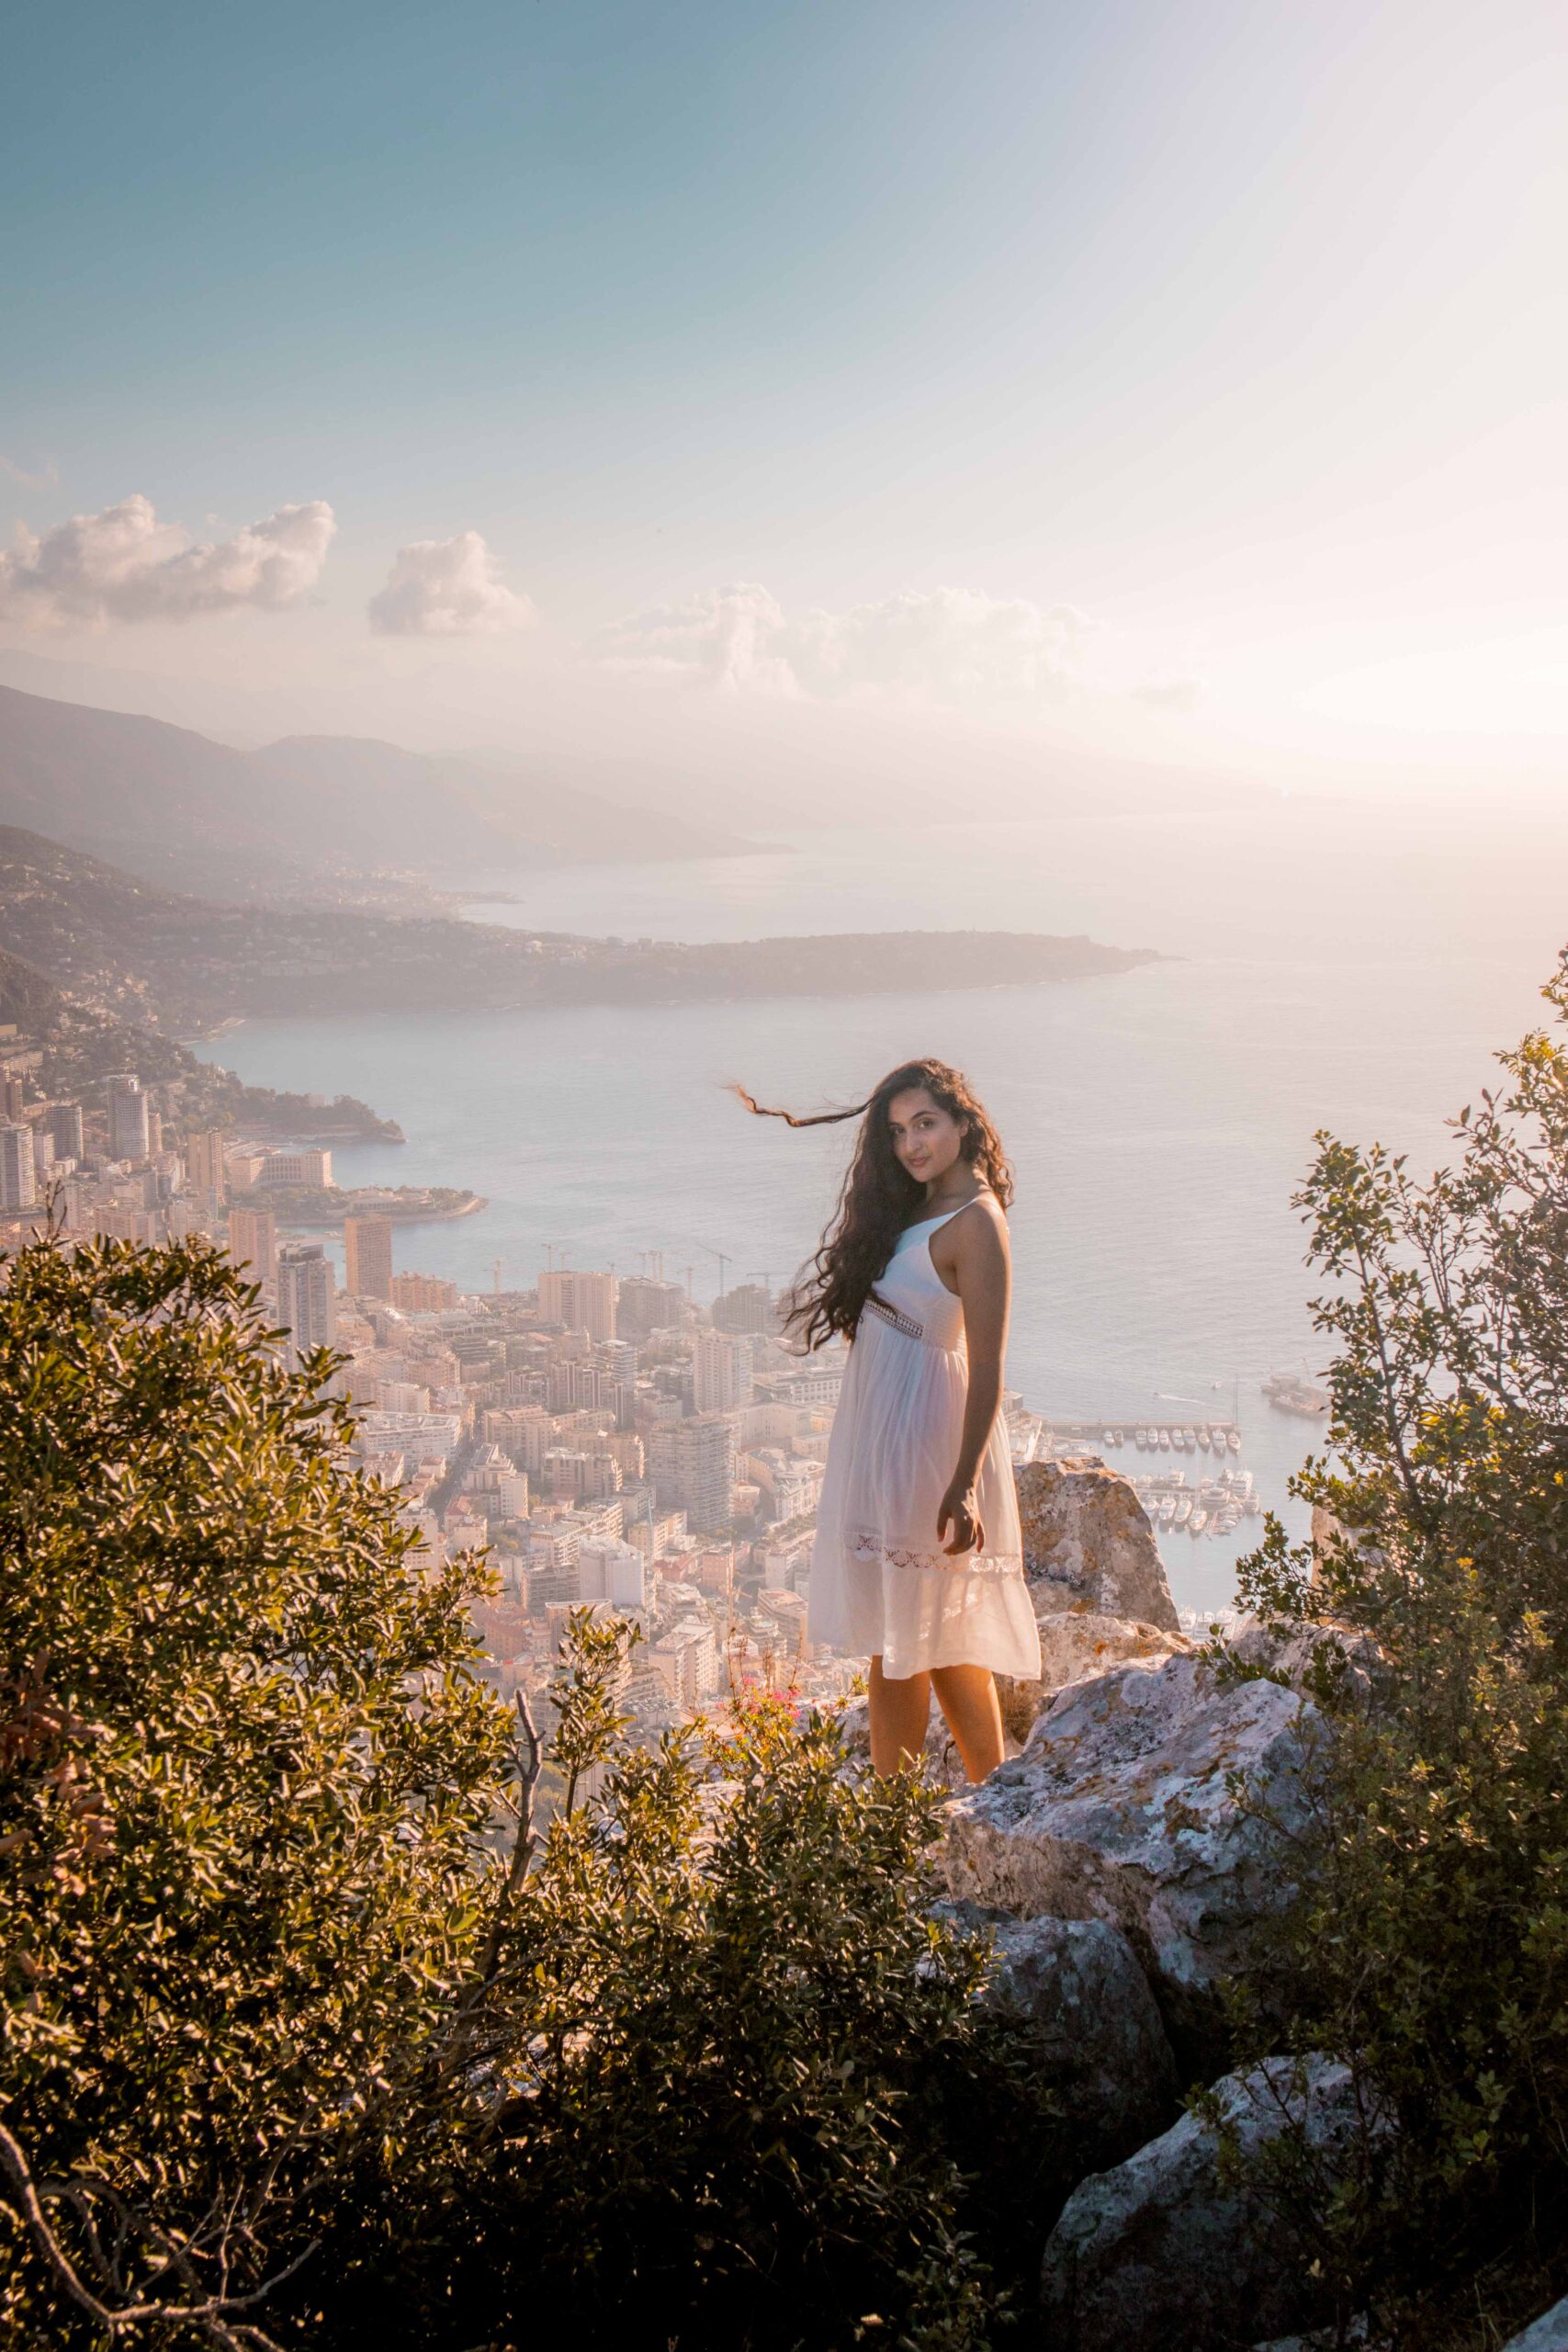 Woman wearing a white dress standing on a rock and posing in front of a panoramic view of Monaco at sunrise from the Tête de Chien rock promontory viewpoint near La Turbie Village, France